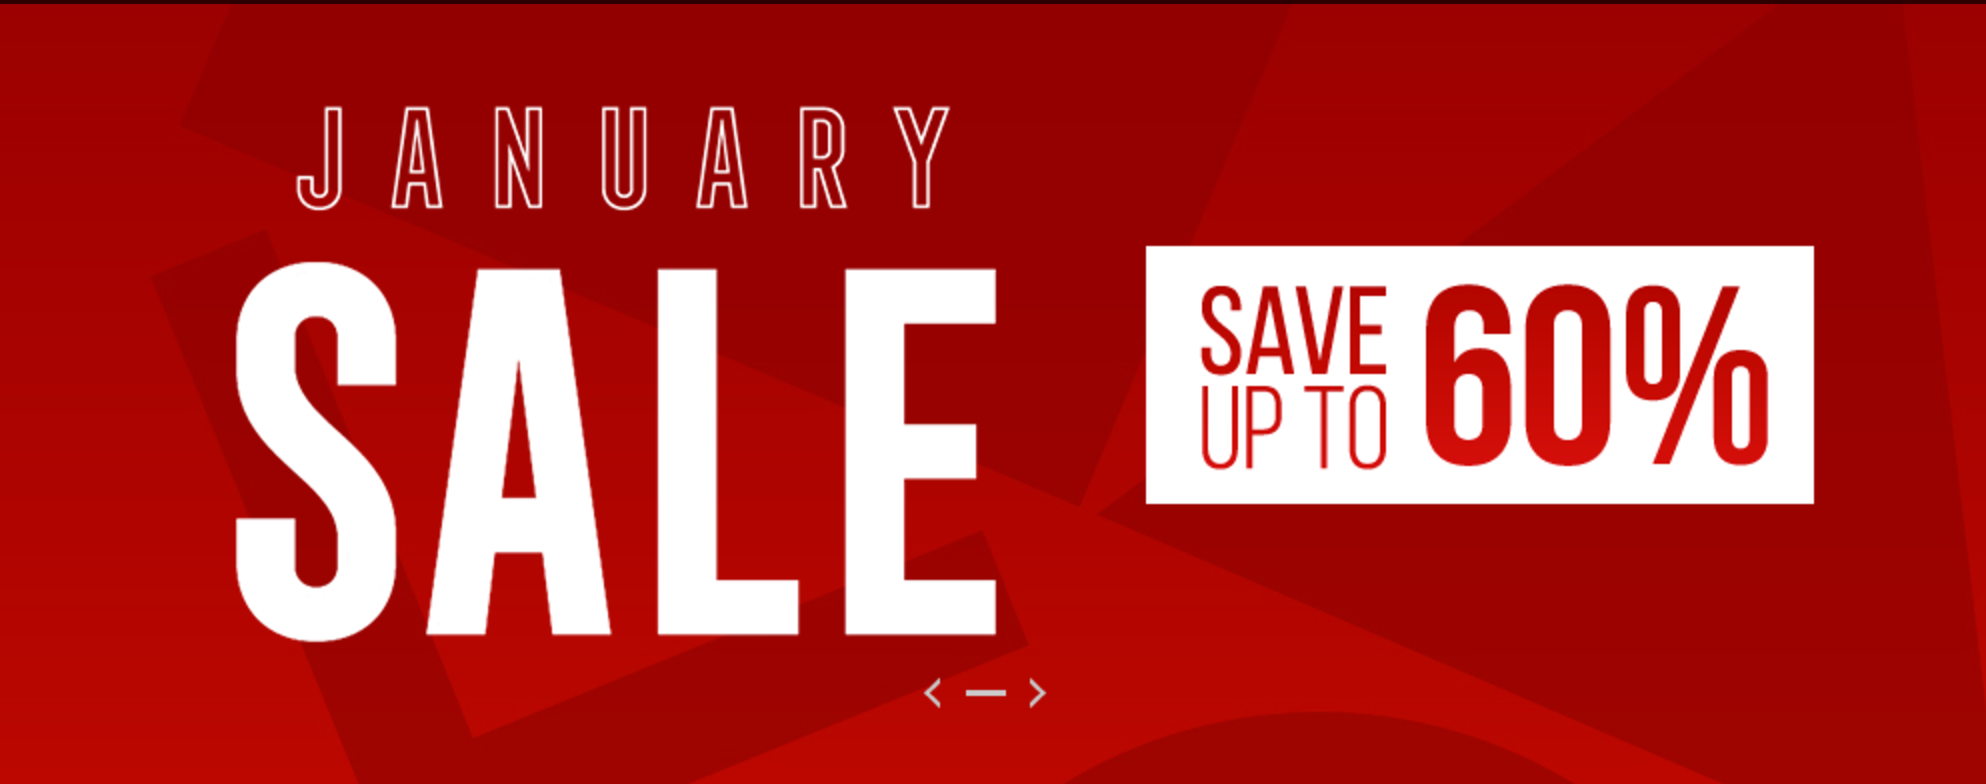 The january sales started and when. January sale PS Store. December sale. Bargain sale. Sale up to 60.